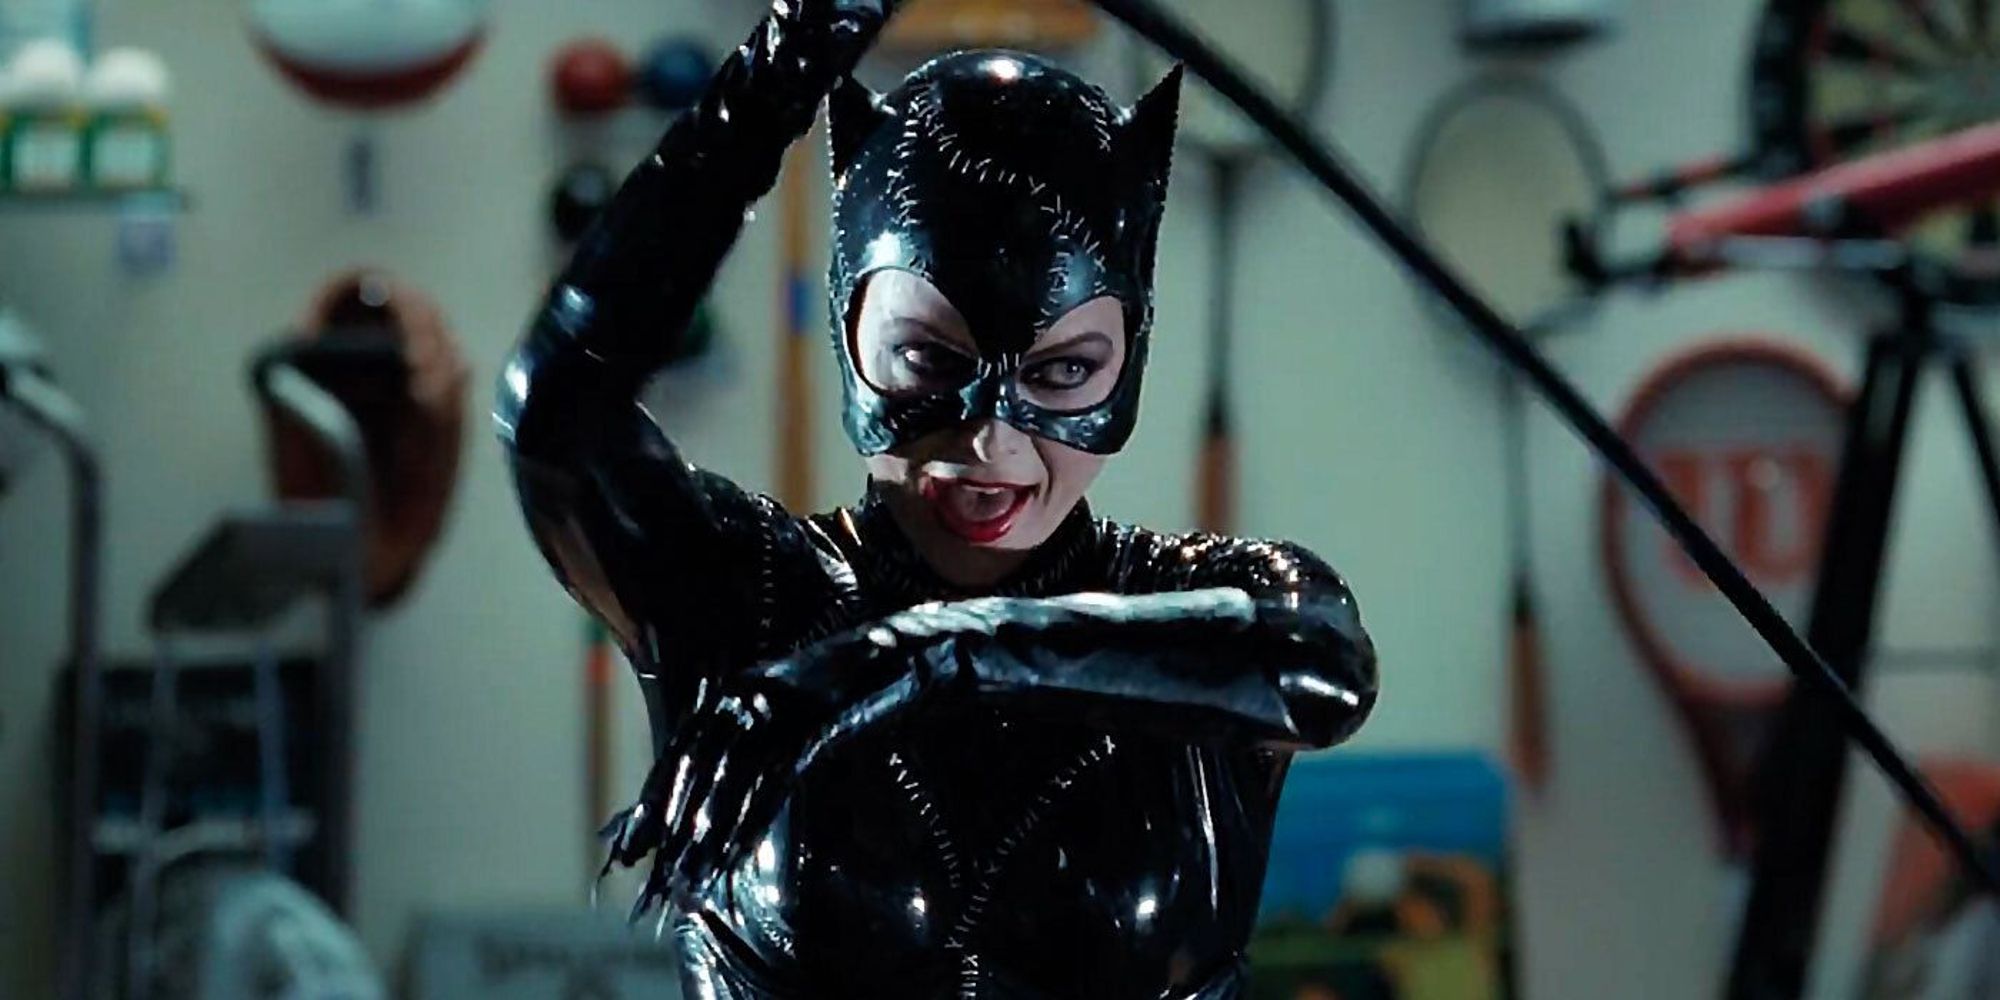 Catwoman wielding her whip in Shreck Plaza in Batman Returns